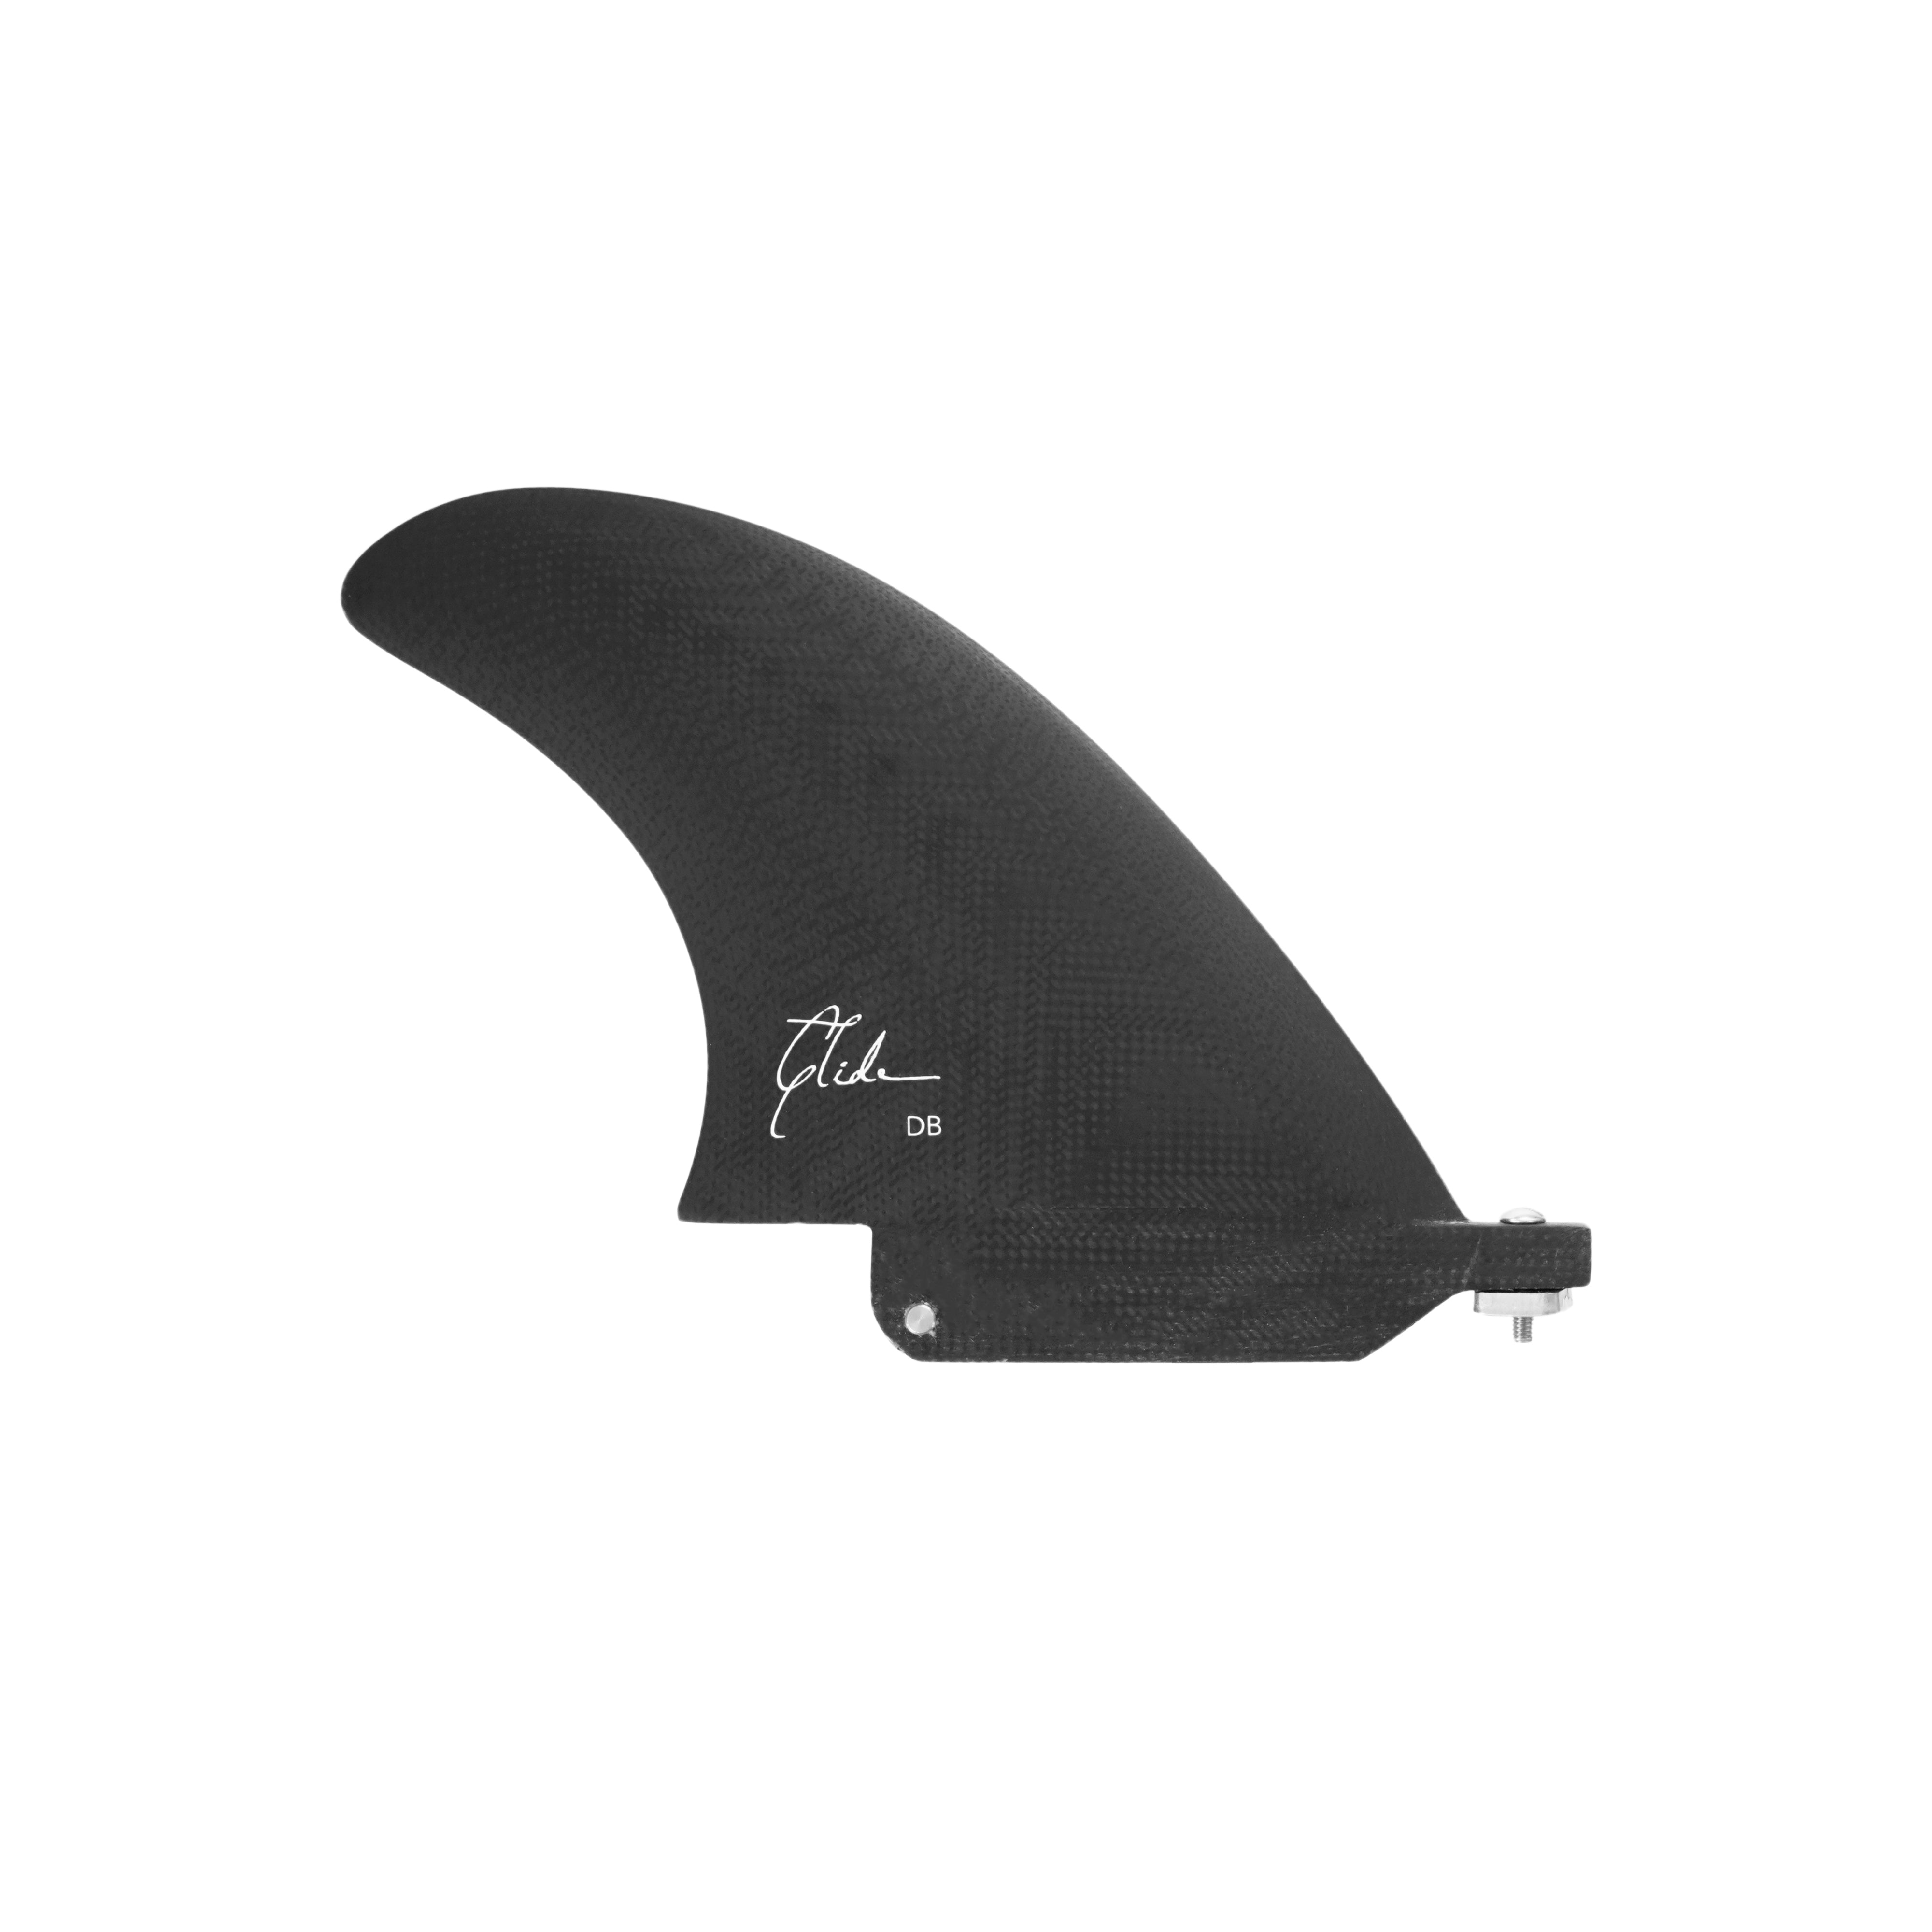 DB - 4 5/8" - Back fin for US box